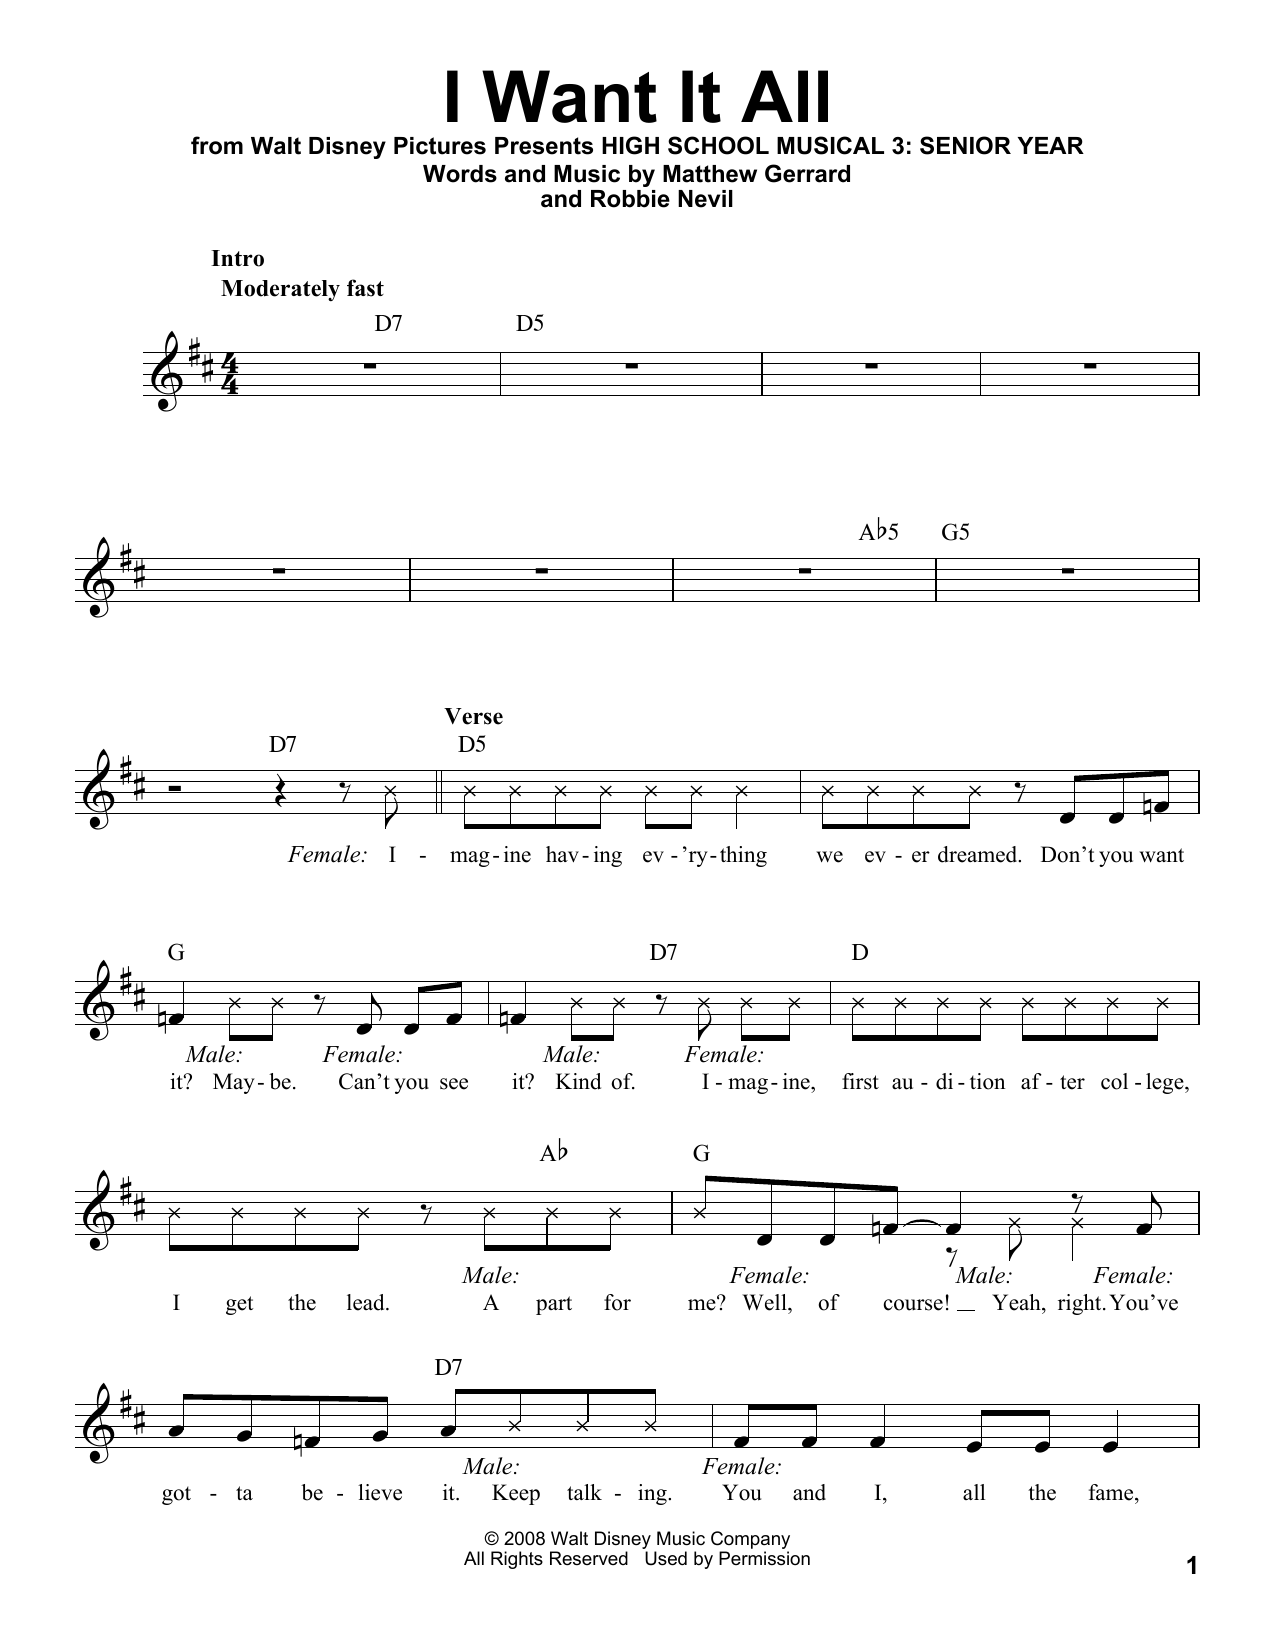 Robbie Nevil I Want It All sheet music notes and chords. Download Printable PDF.